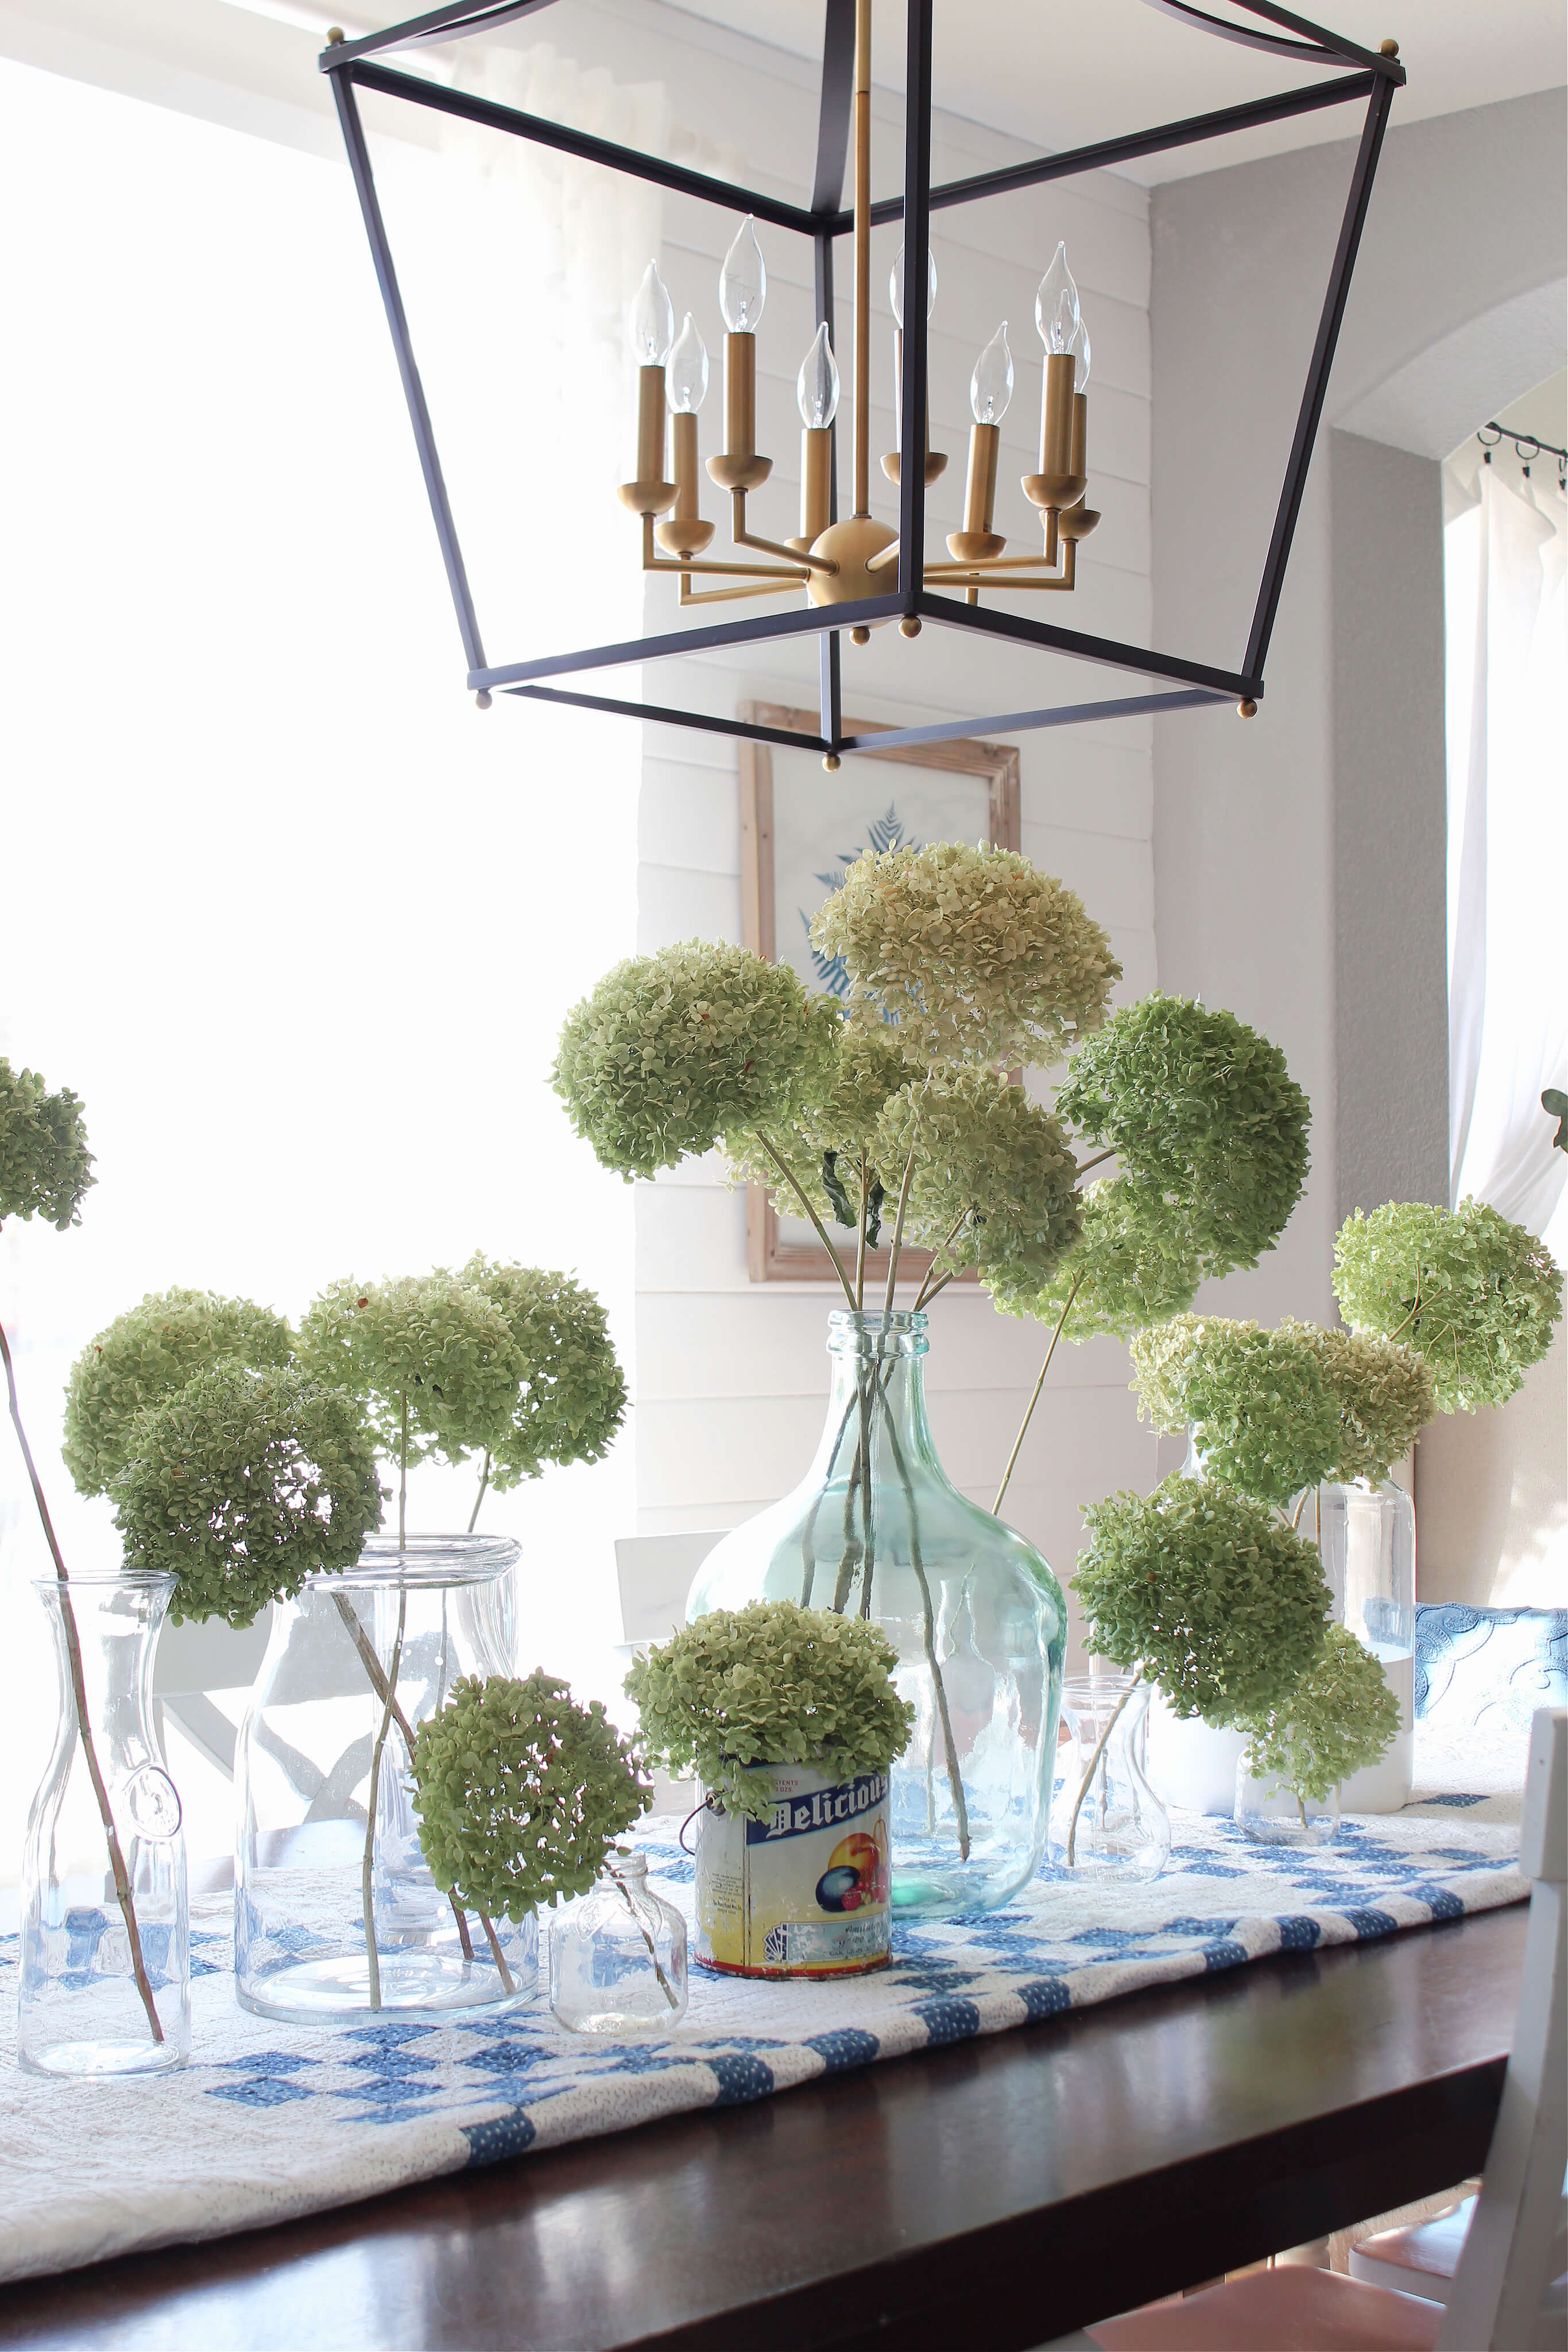 A Spring centerpiece of dried hydrangeas just perfect for Spring!